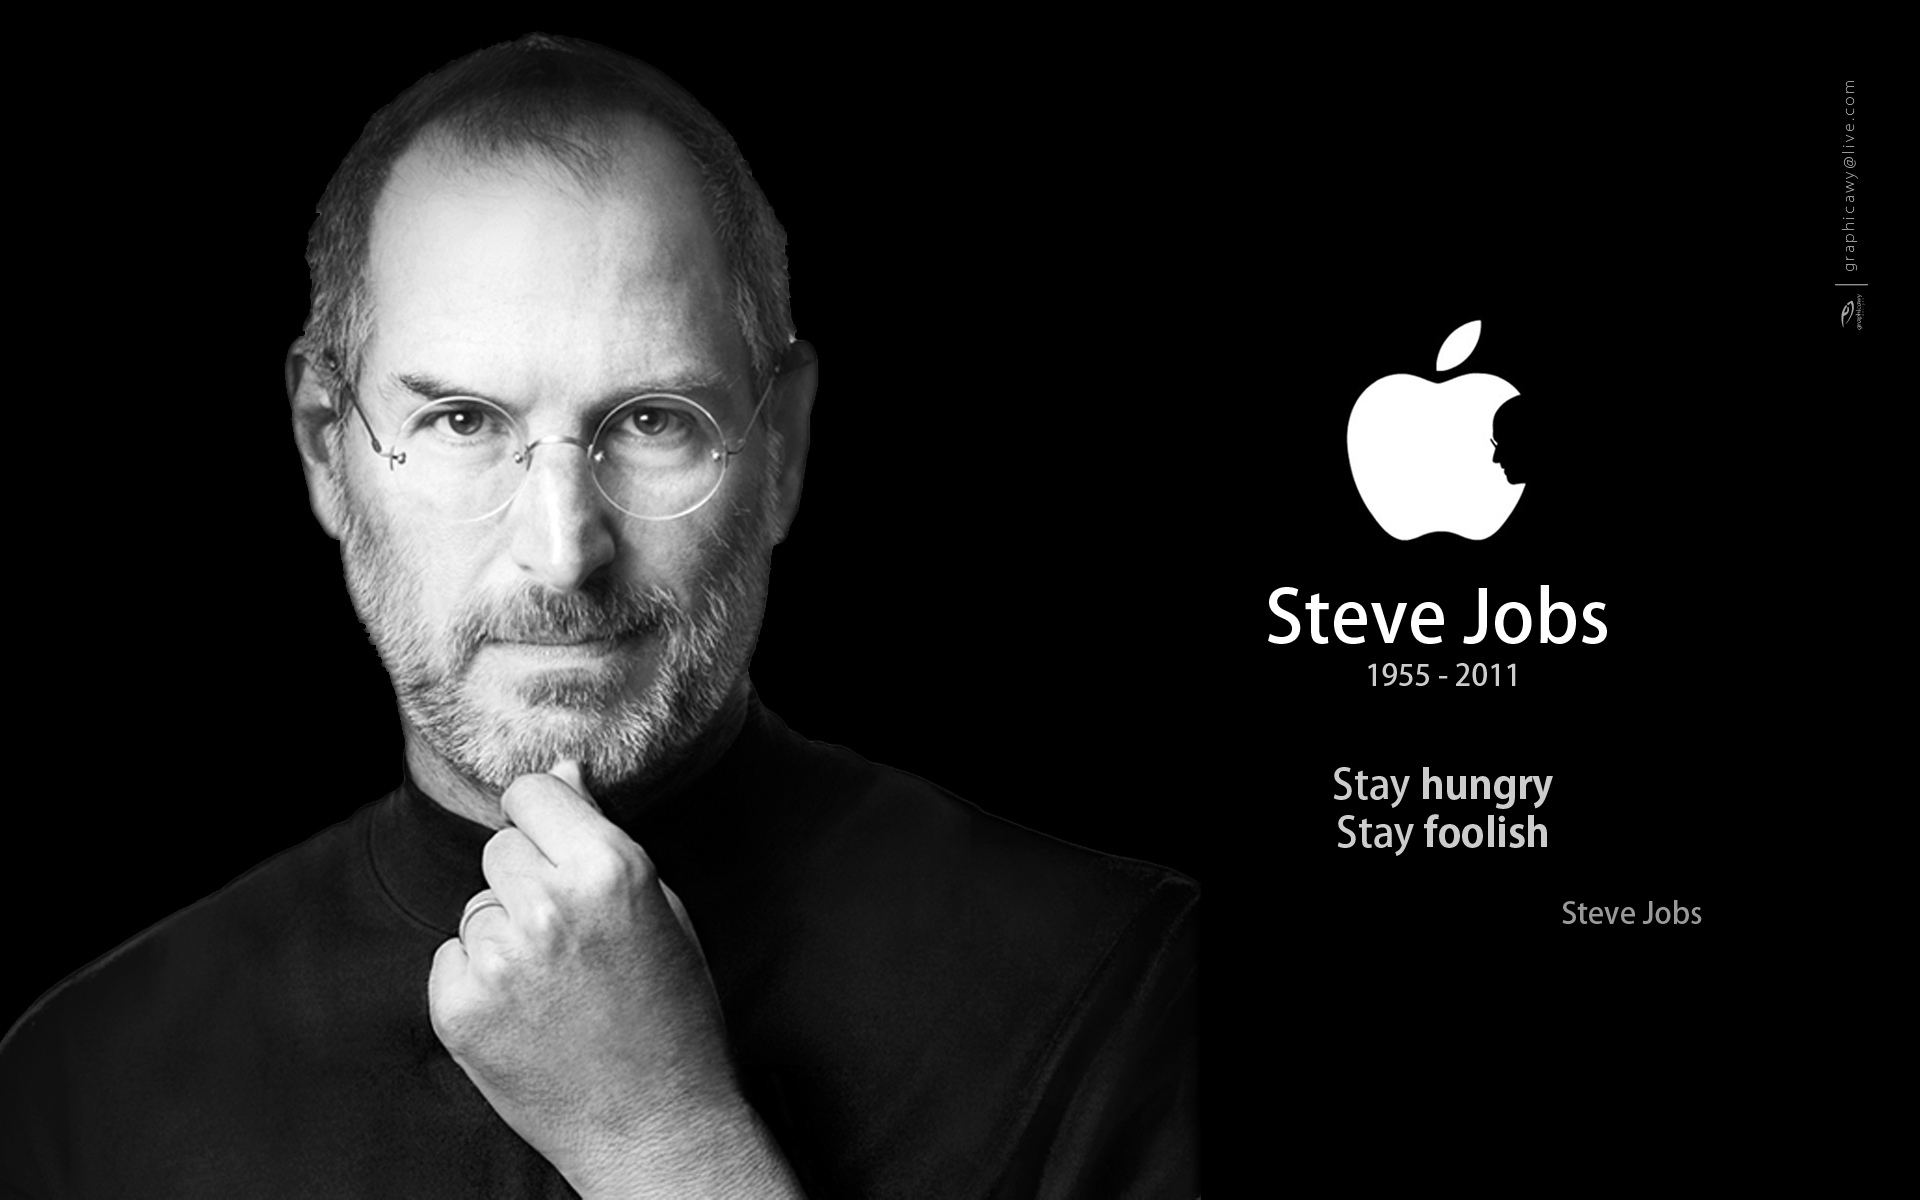 Please check our latest hd widescreen wallpaper below and bring beauty to your desktop. Steve Jobs HD Wallpaper